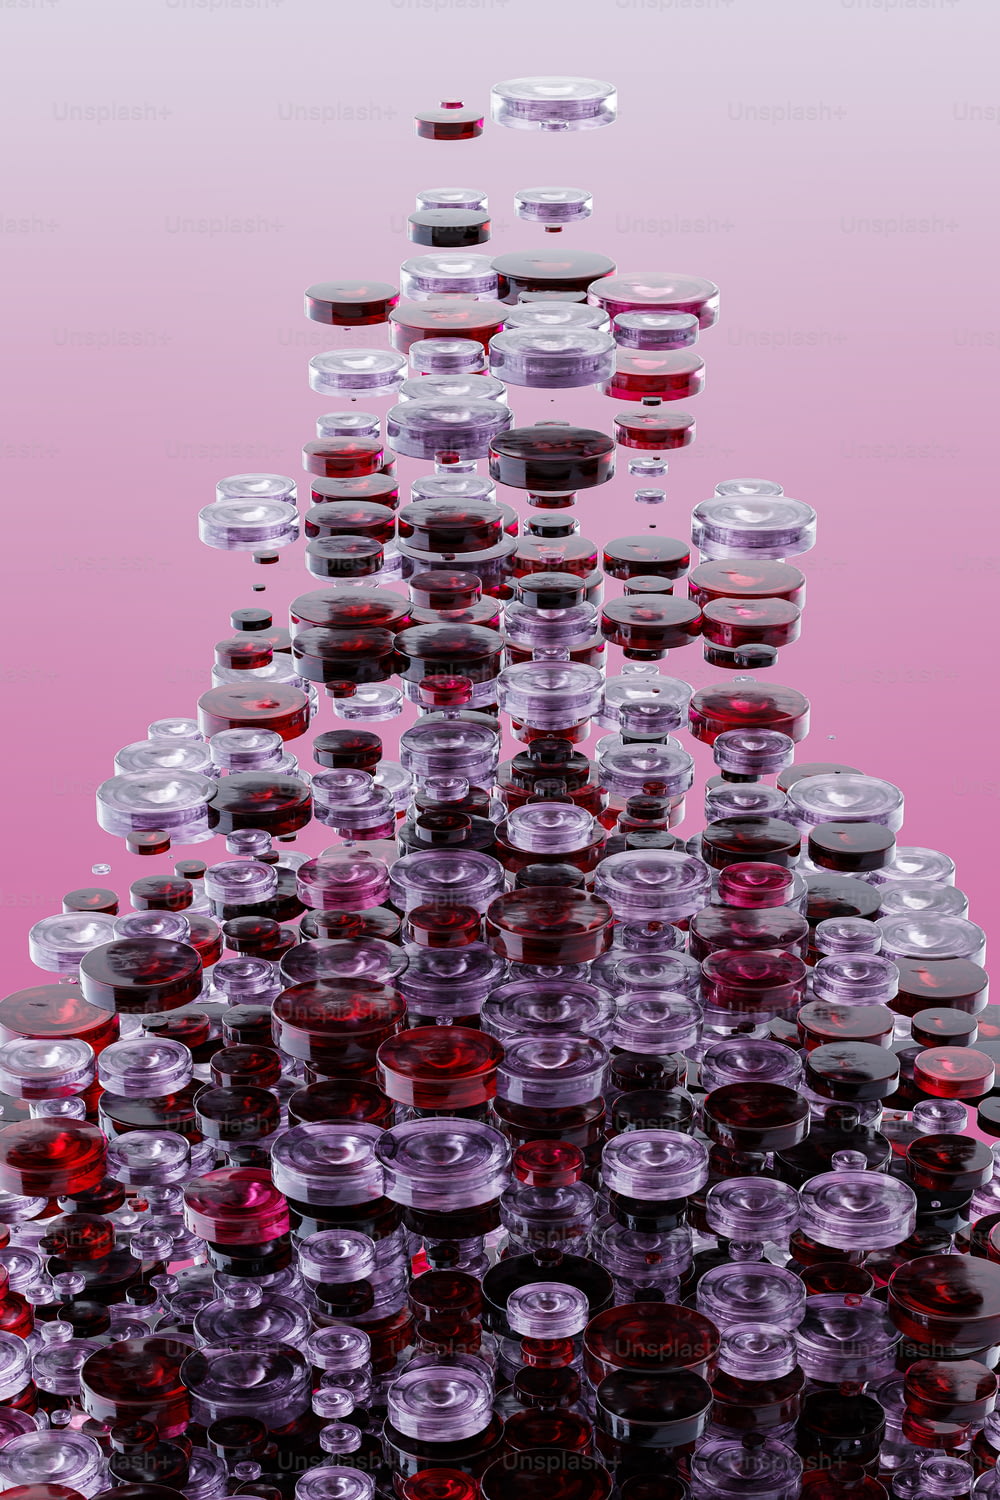 a large pile of red and purple glass objects